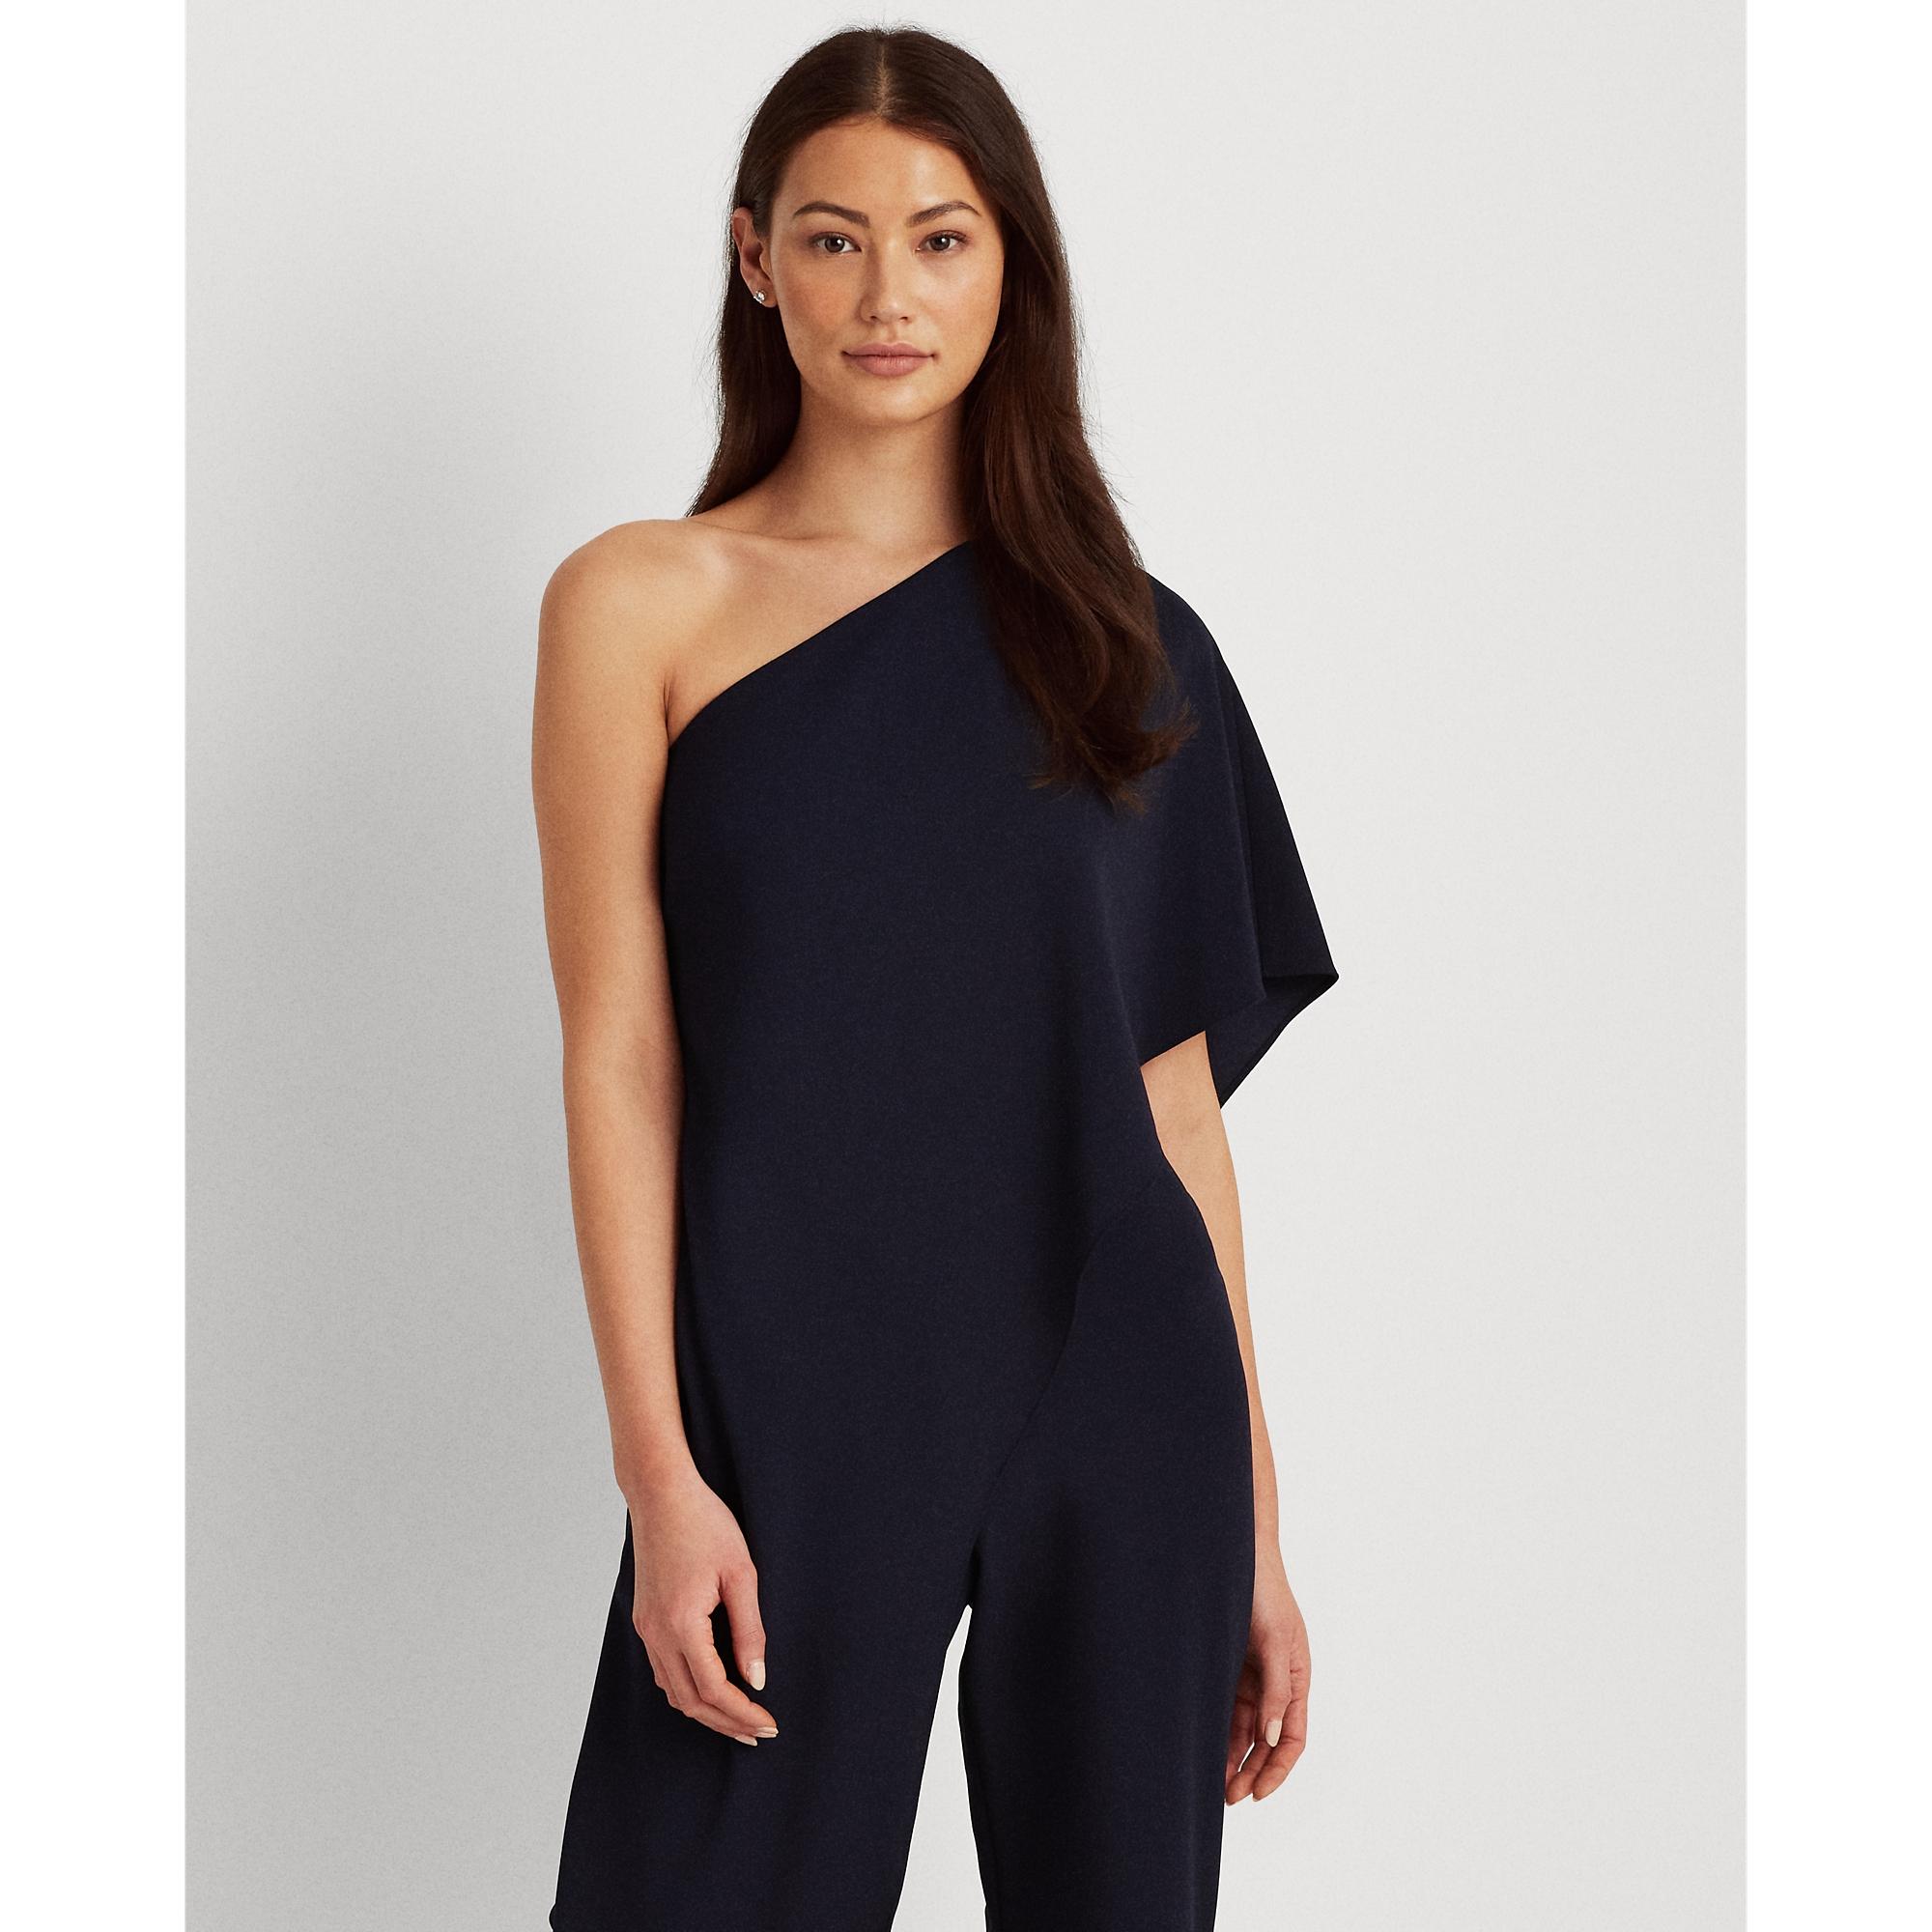 Buy Black Jumpsuits &Playsuits for Women by STYLE ISLAND Online | Ajio.com